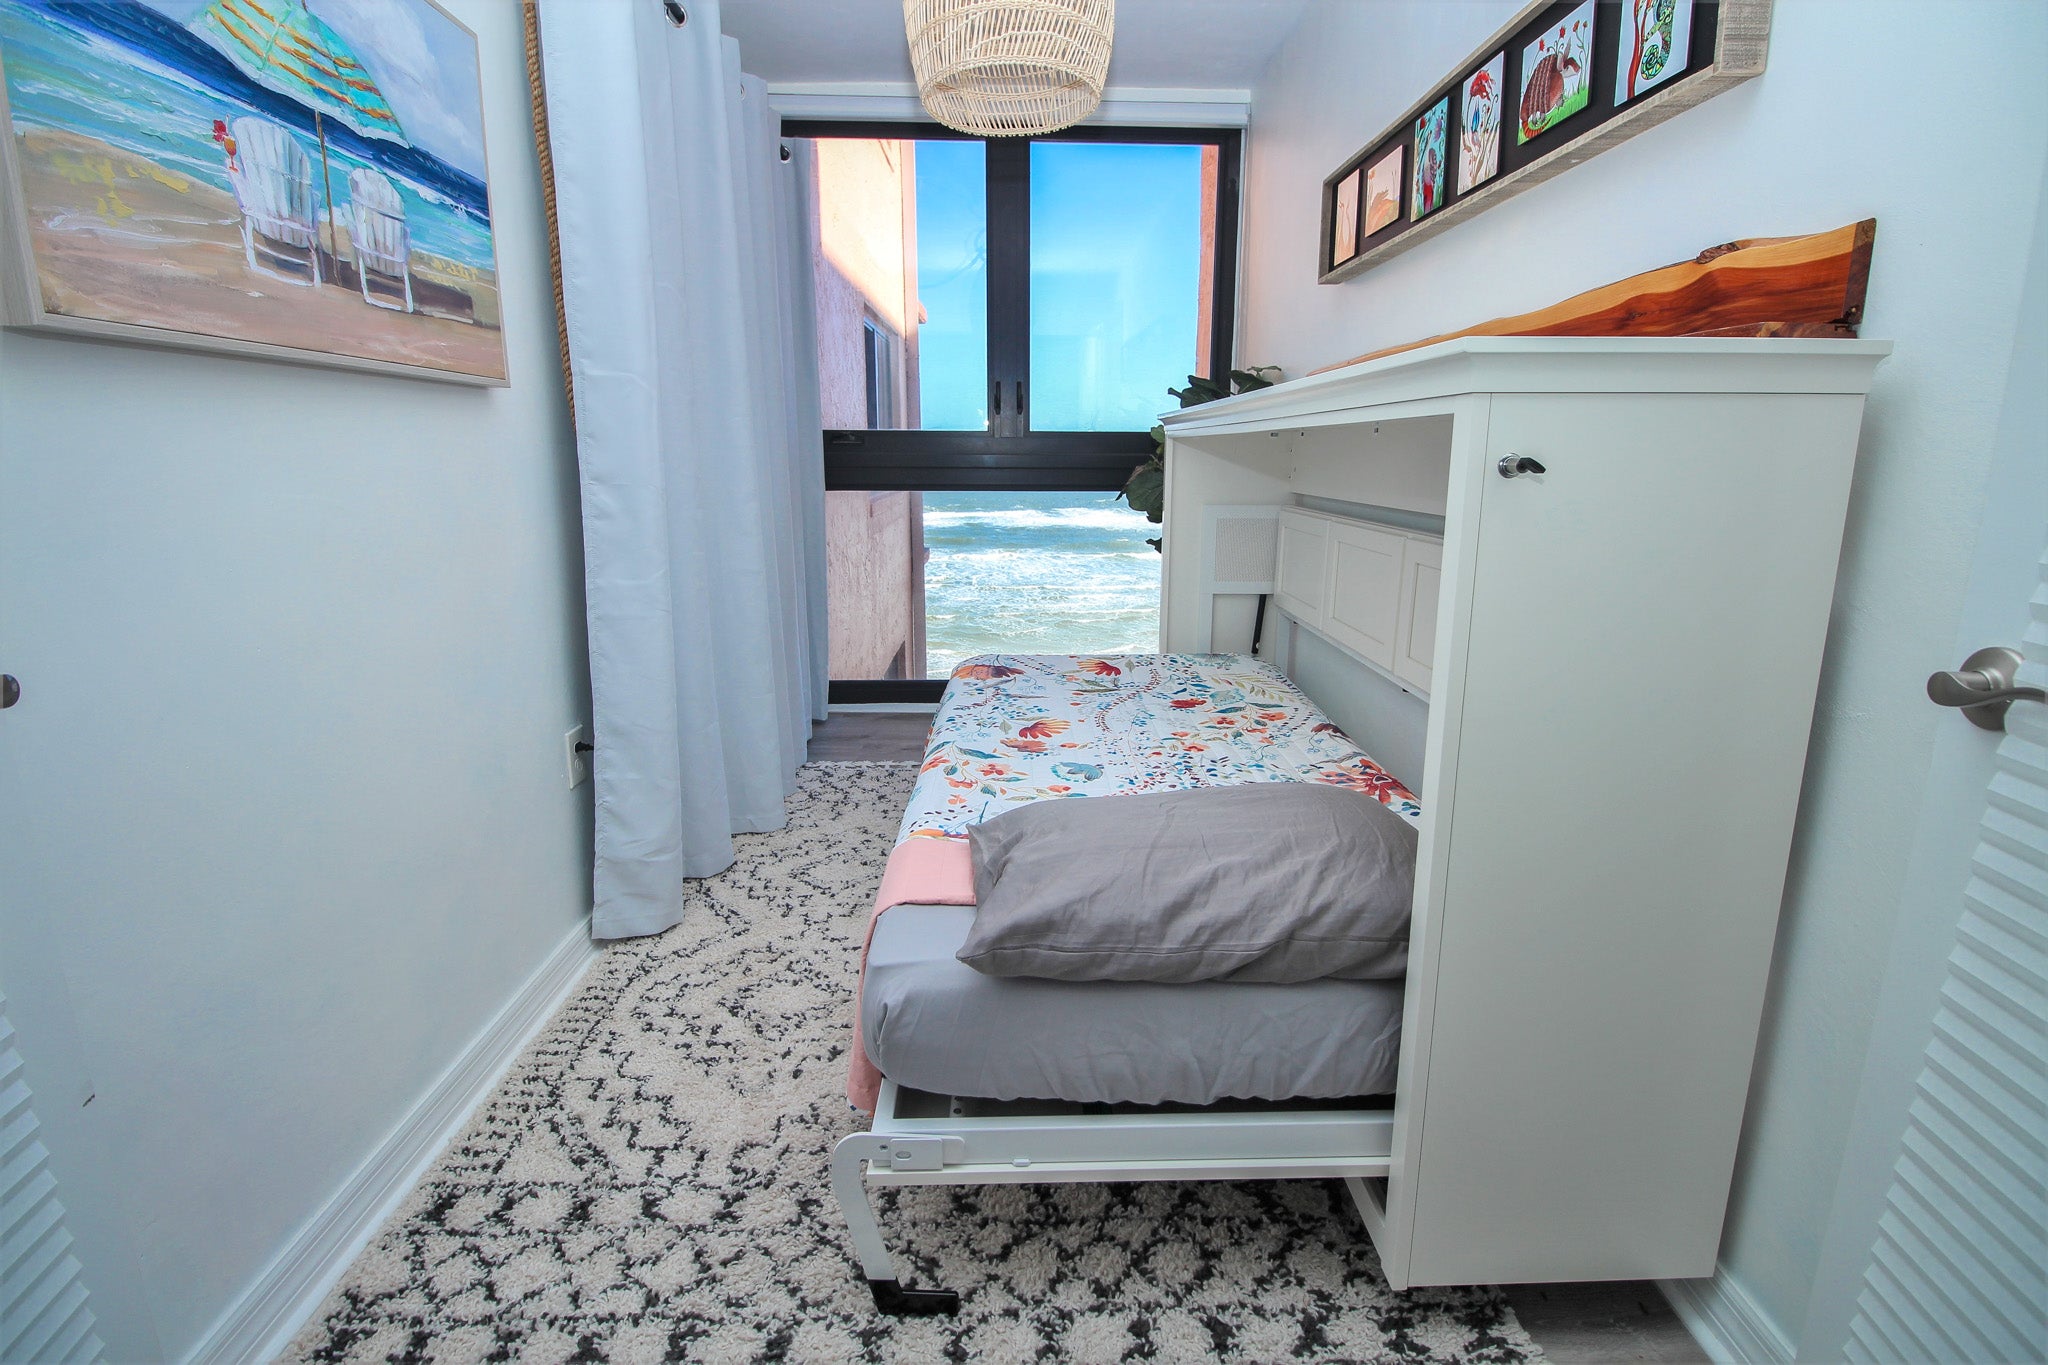 Sunroom has a twin cabinet bed that folds up